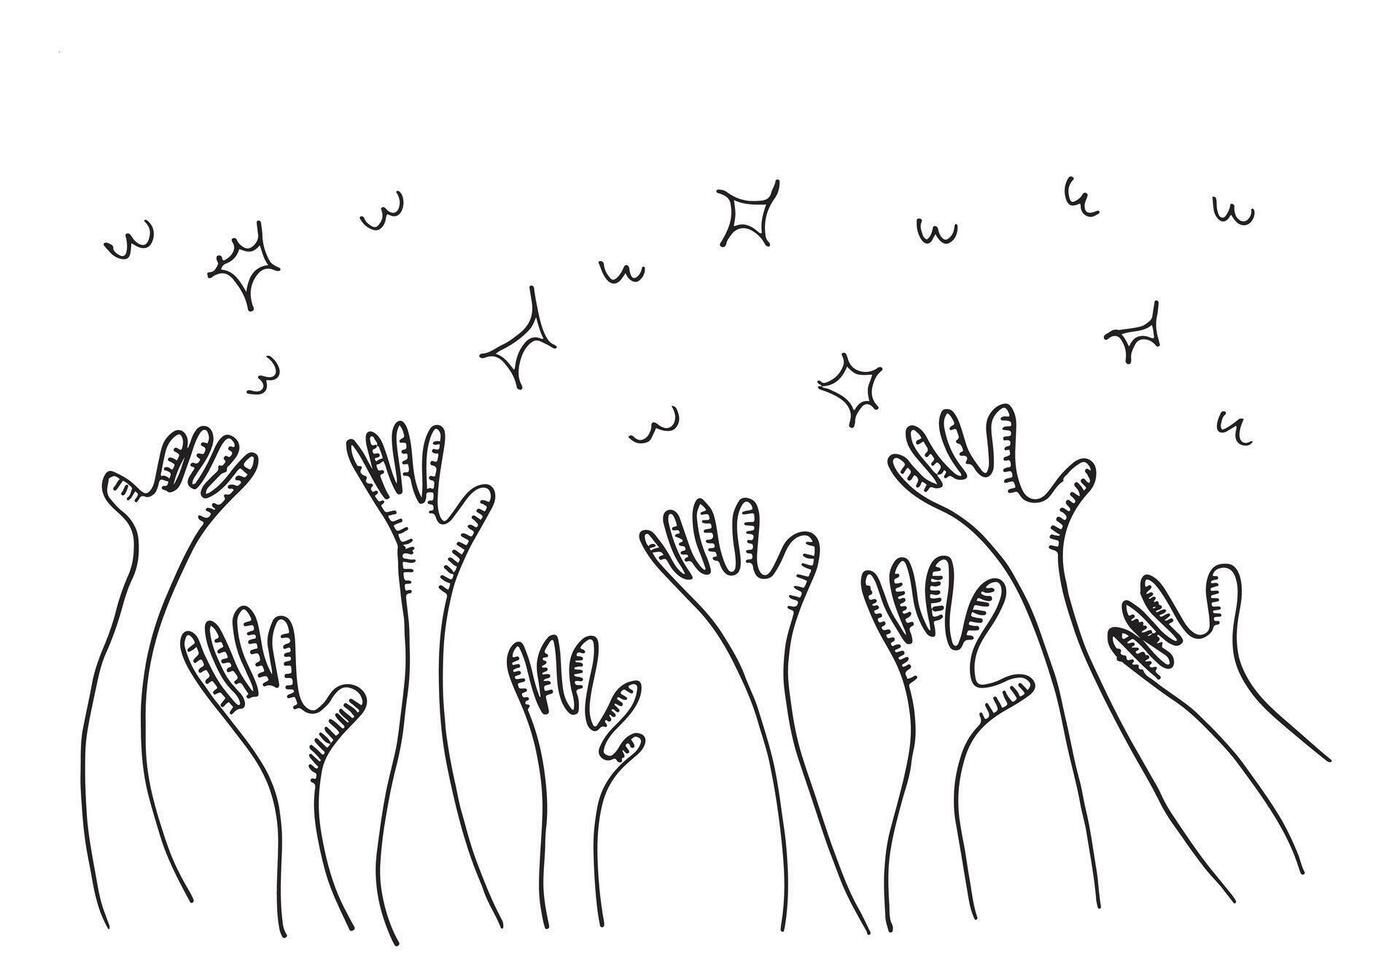 Applause hand draw on white background.vector illustration. vector